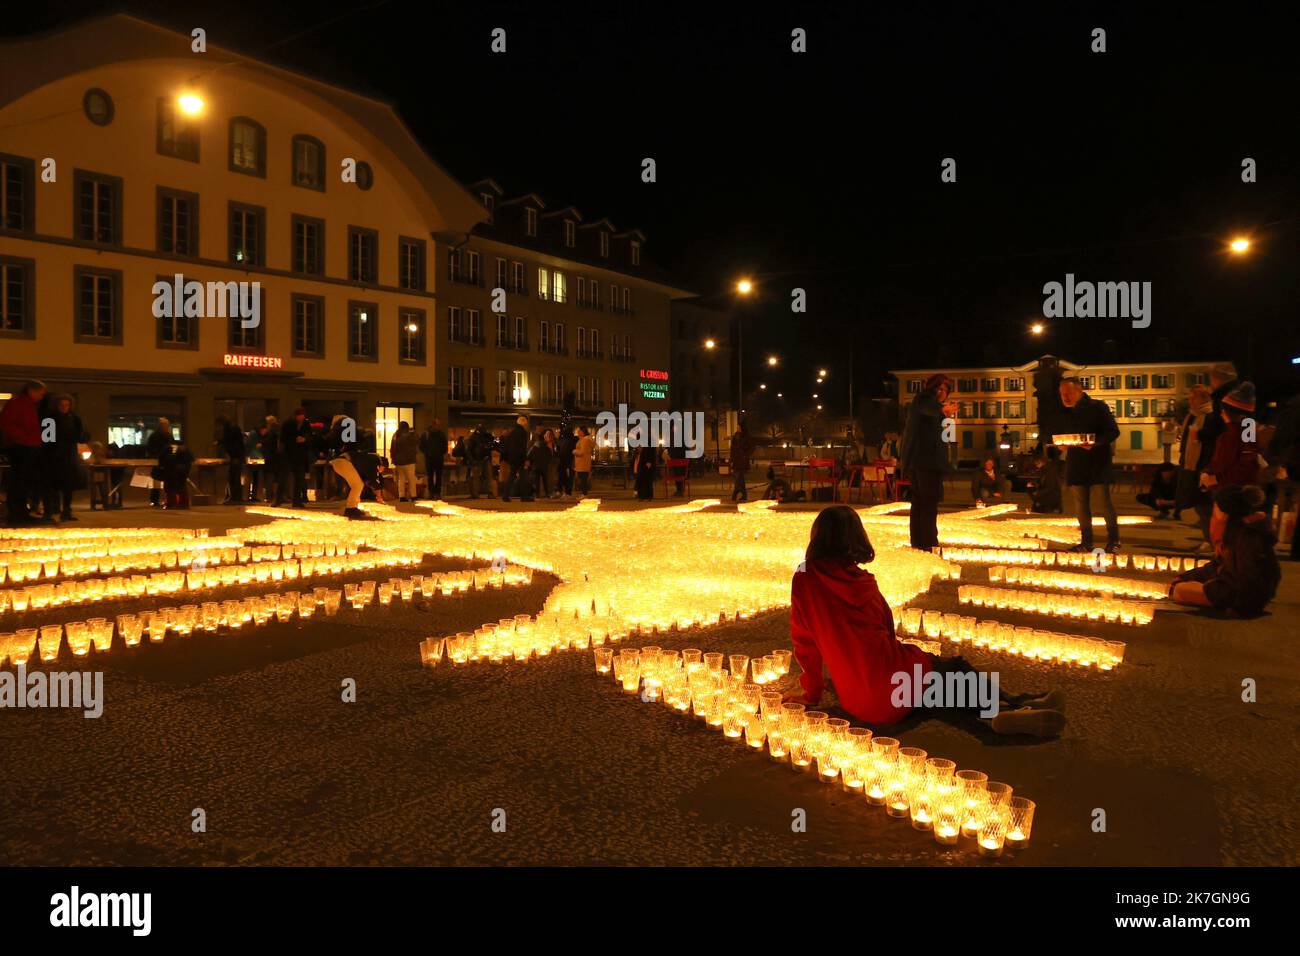 ©Francois Glories/MAXPPP - 11/03/2022 10,000 candles for peace' action in the Swiss Capital Bern,the national churches, the Jewish communities and the 'Offene Kirche Bern' invite citizens to light candles for peace on the Waisenhausplatz near the Federal Palace. Bern Switzerland. March 11, 2022. Stock Photo